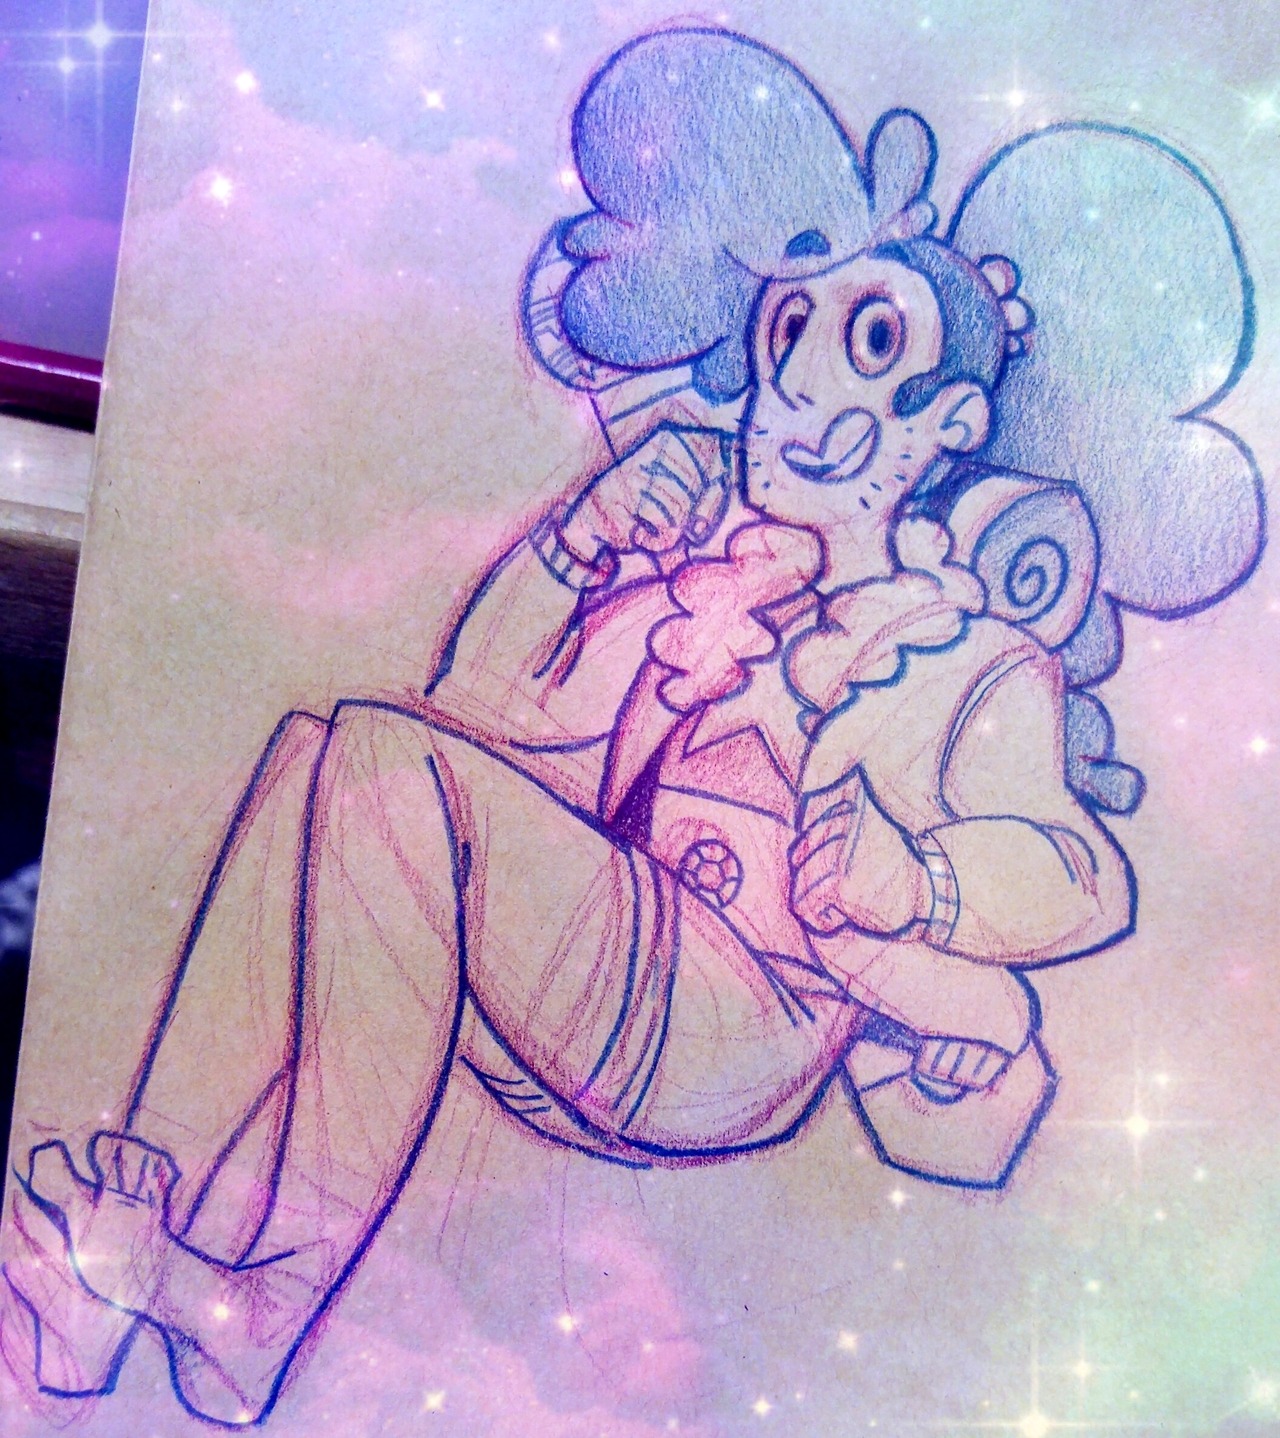 Not my best drawing ugh it looks so stiff… buuuut oh well it is just a sketch! Stevonnie in their Stranded design cause they look gorgeous!! (Sorry for overdoing it with the filters I couldn’t help...